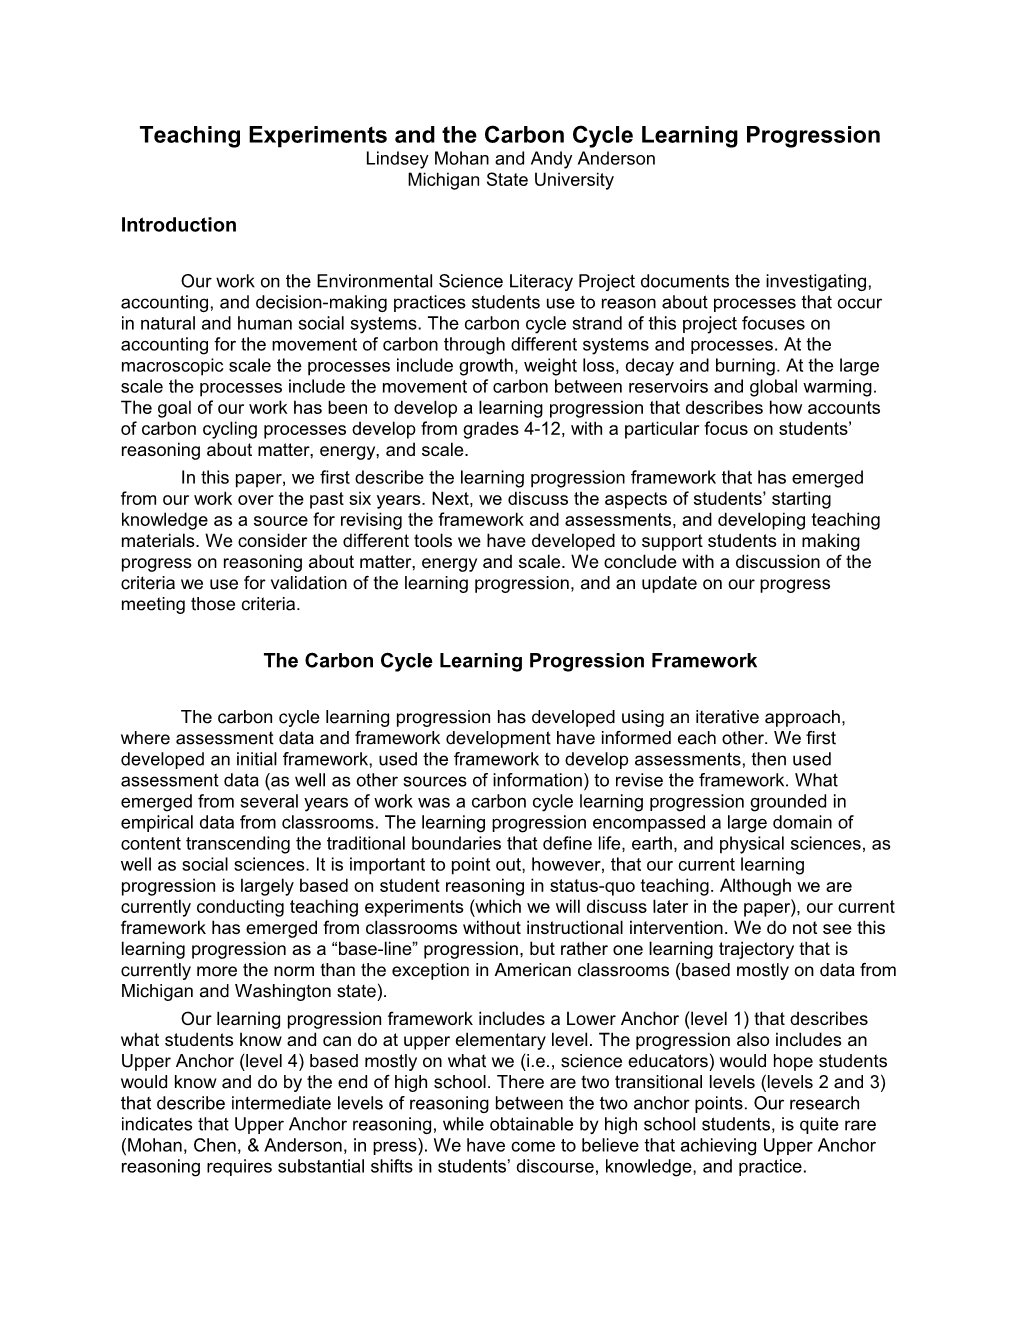 Teaching Experiments and the Carbon Cycle Learning Progression